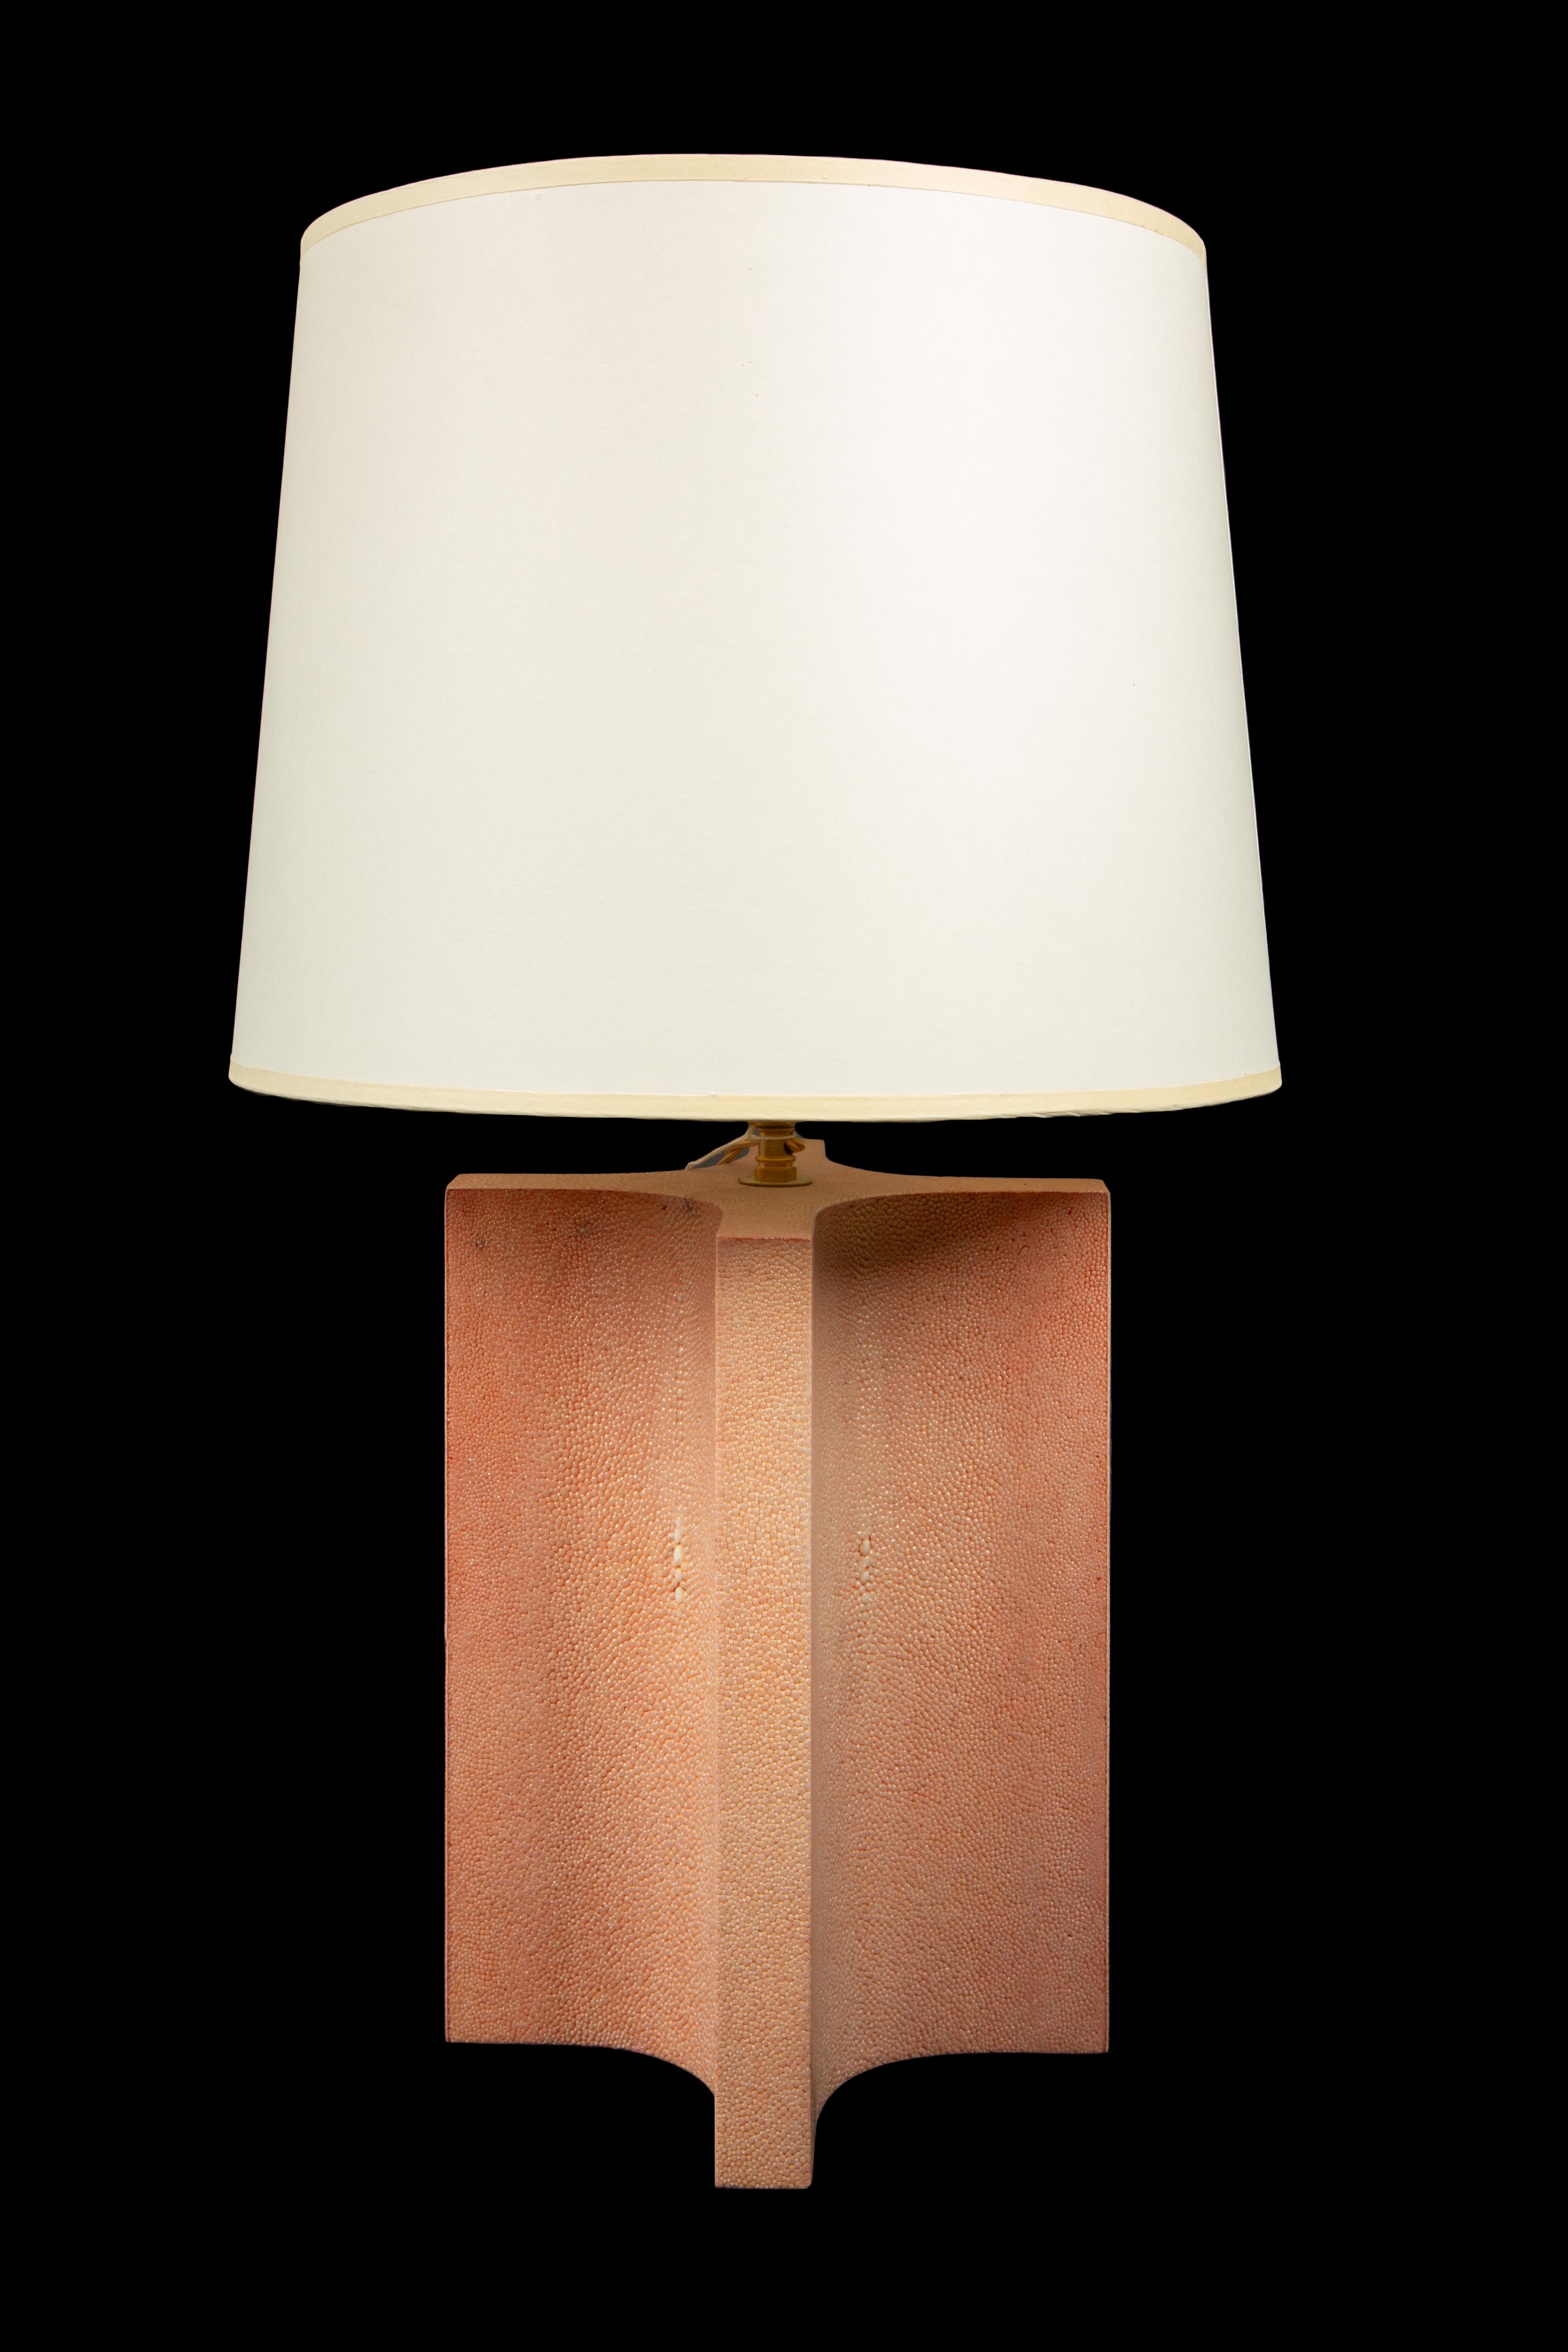 Light pink shagreen lamp

Measures approximately: 9